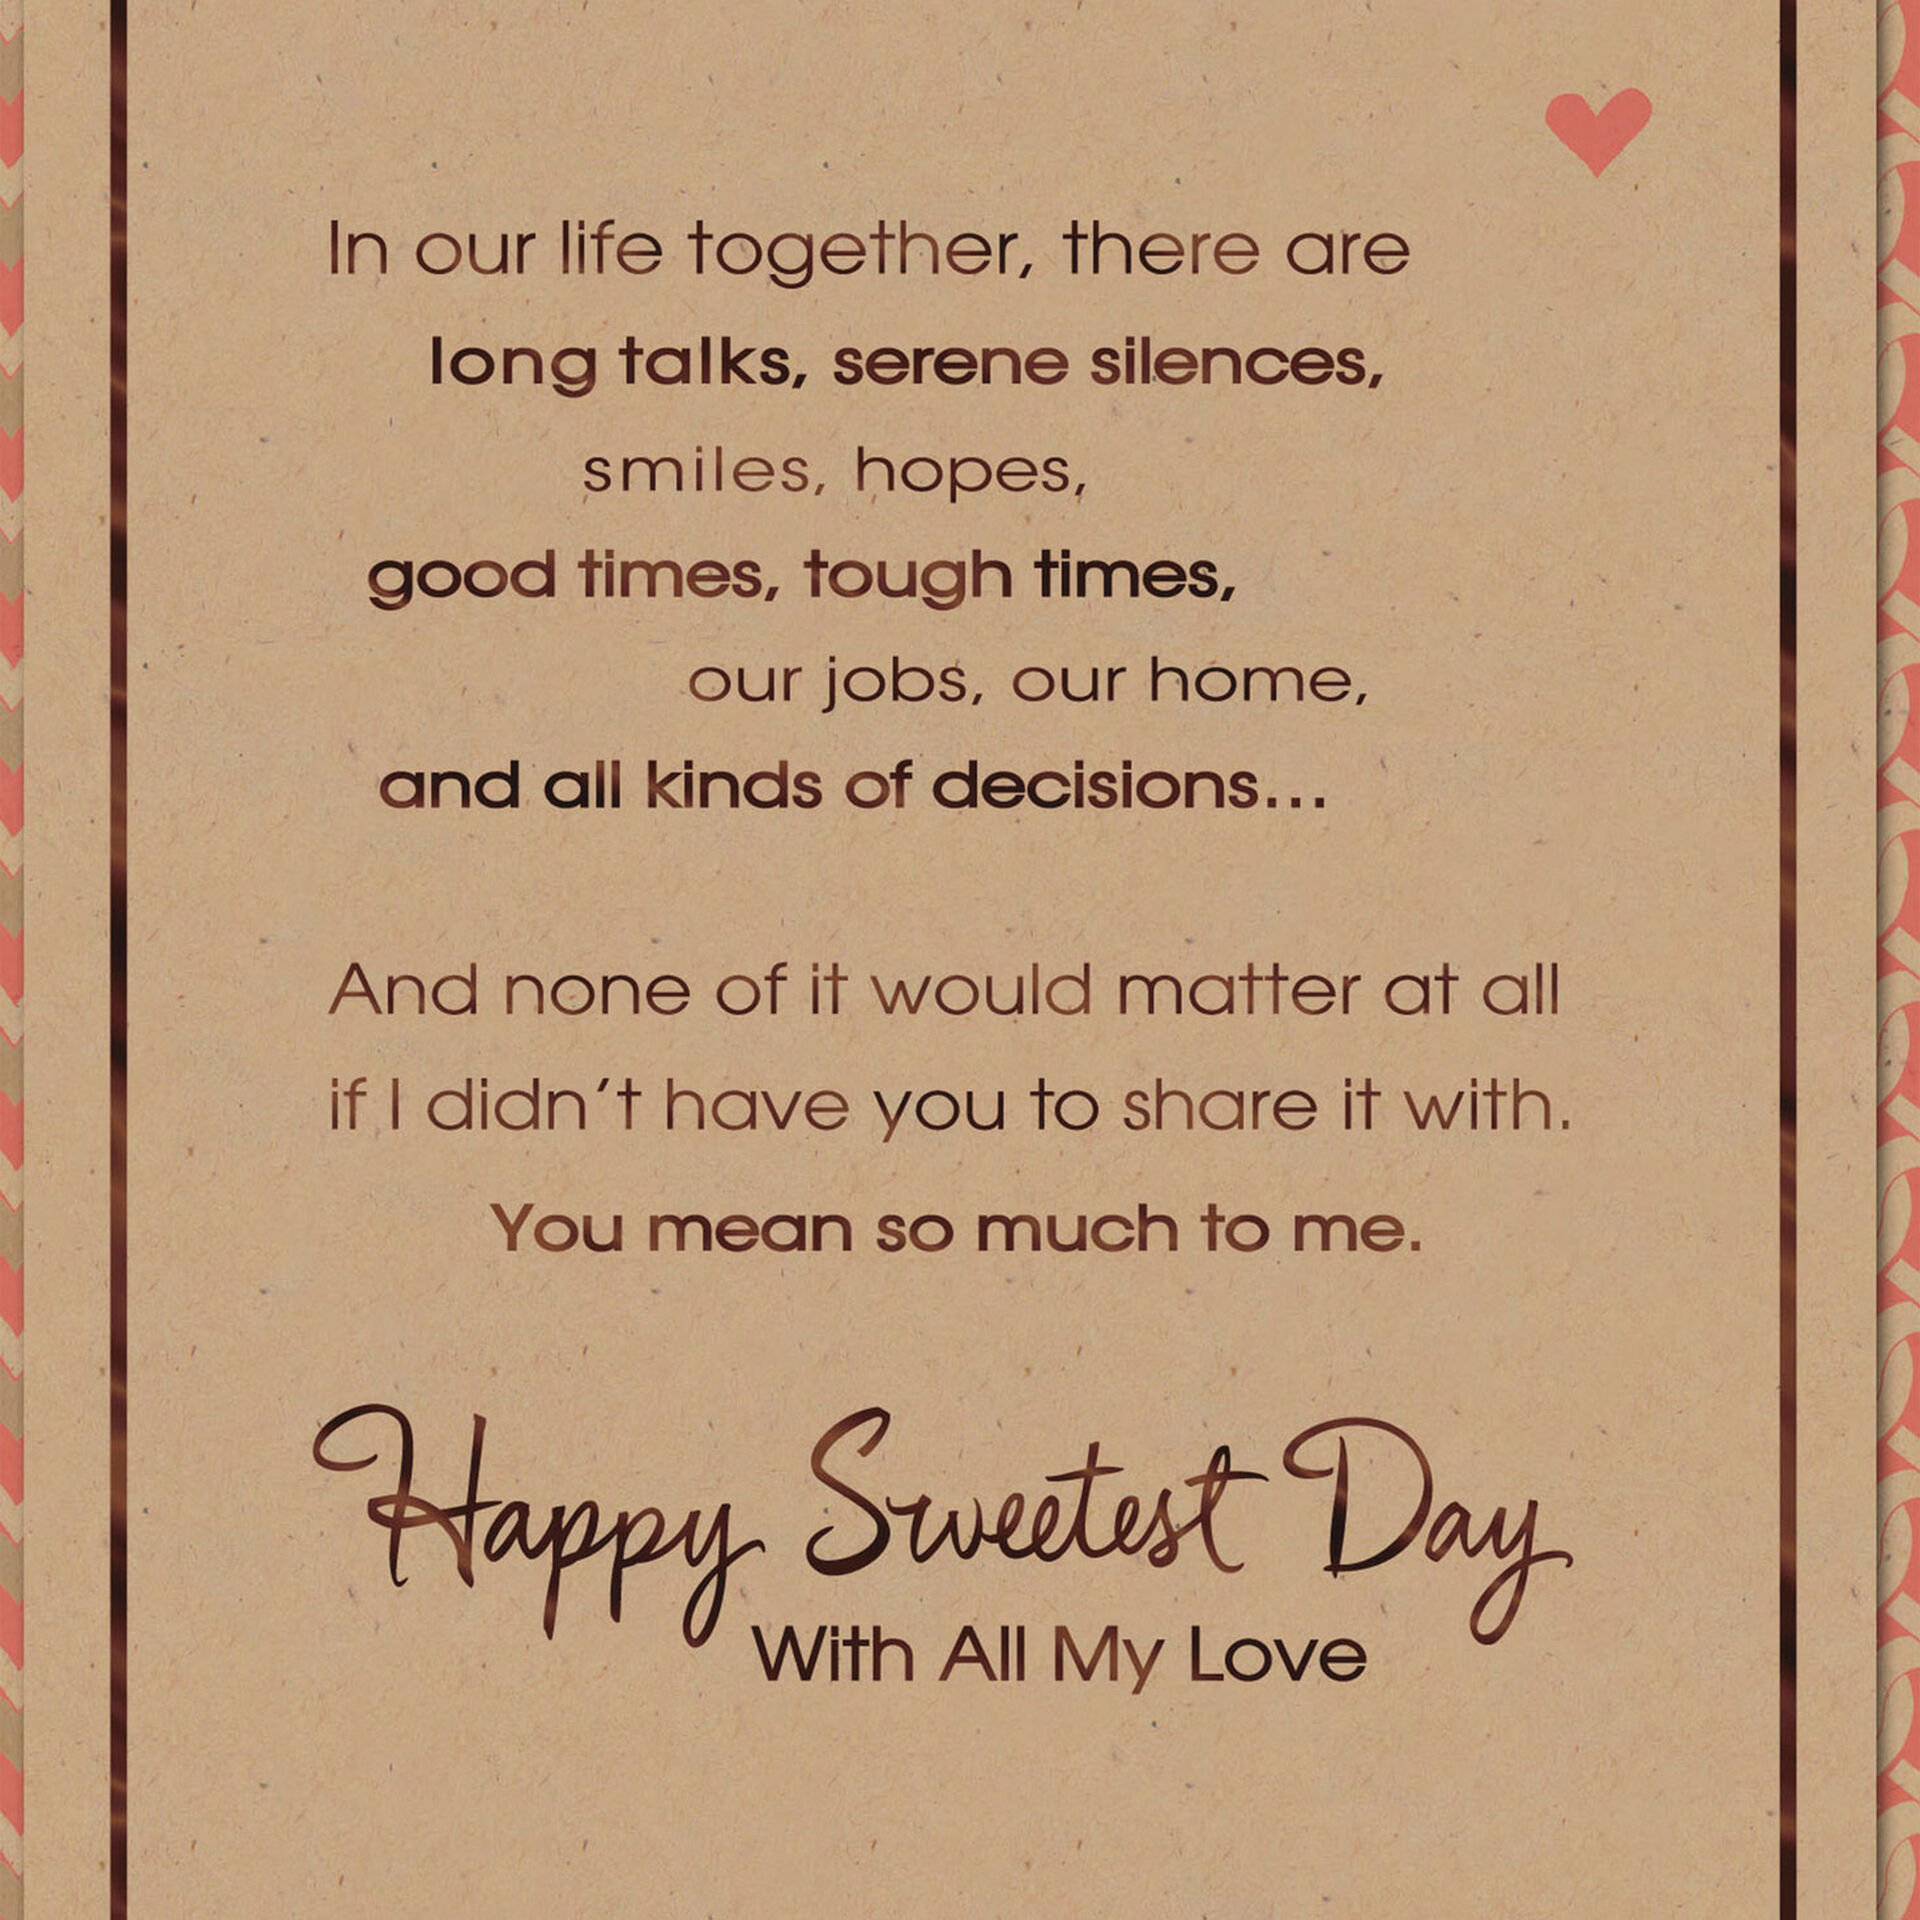 all-my-love-sweetest-day-card-for-husband-greeting-cards-hallmark